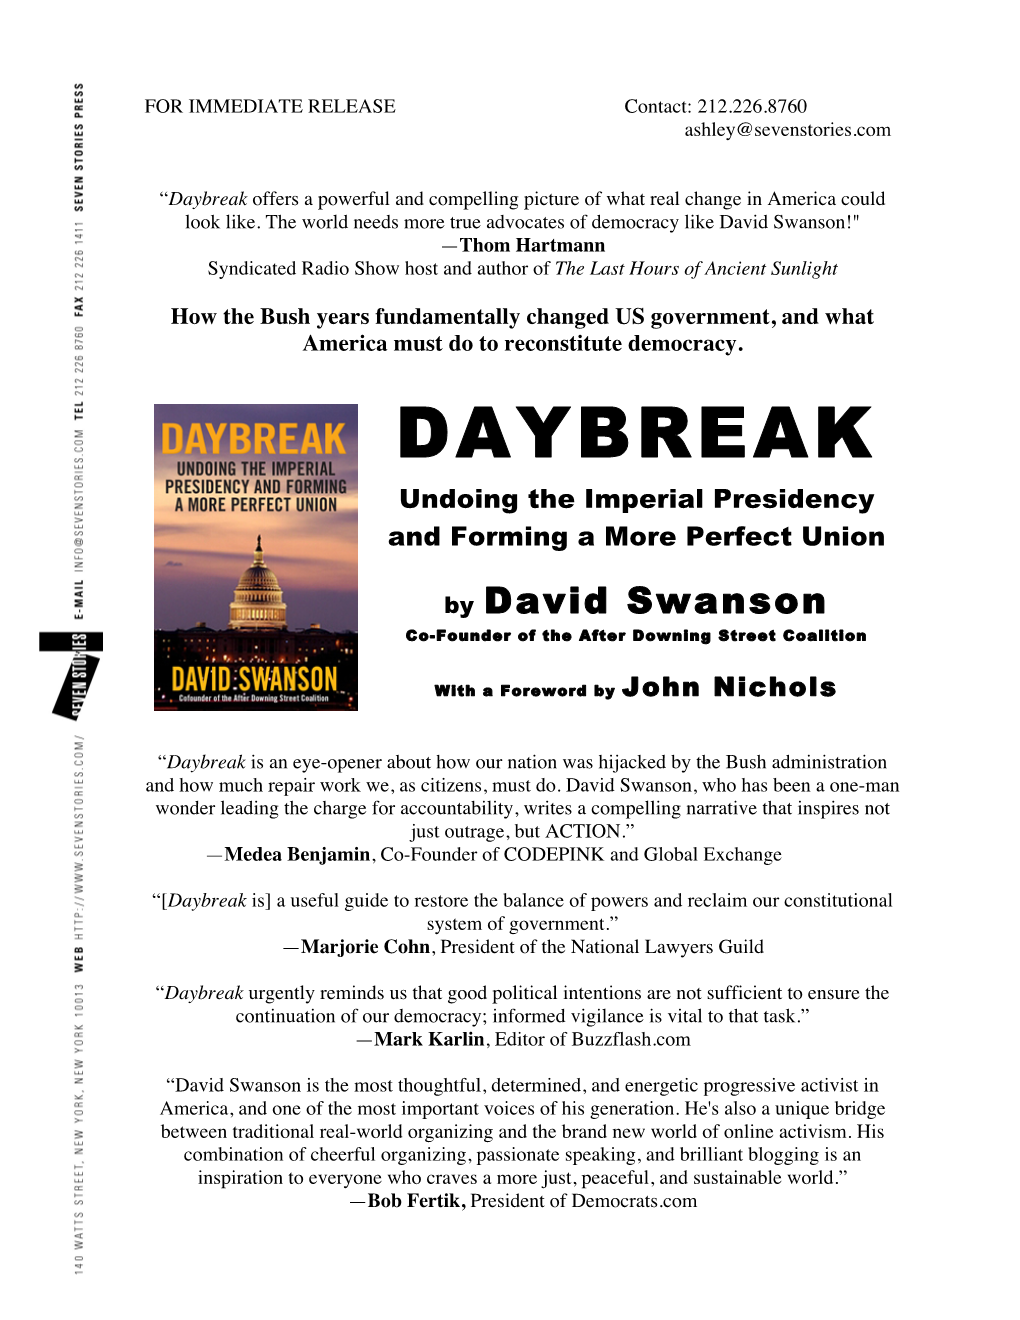 Daybreak Offers a Powerful and Compelling Picture of What Real Change in America Could Look Like